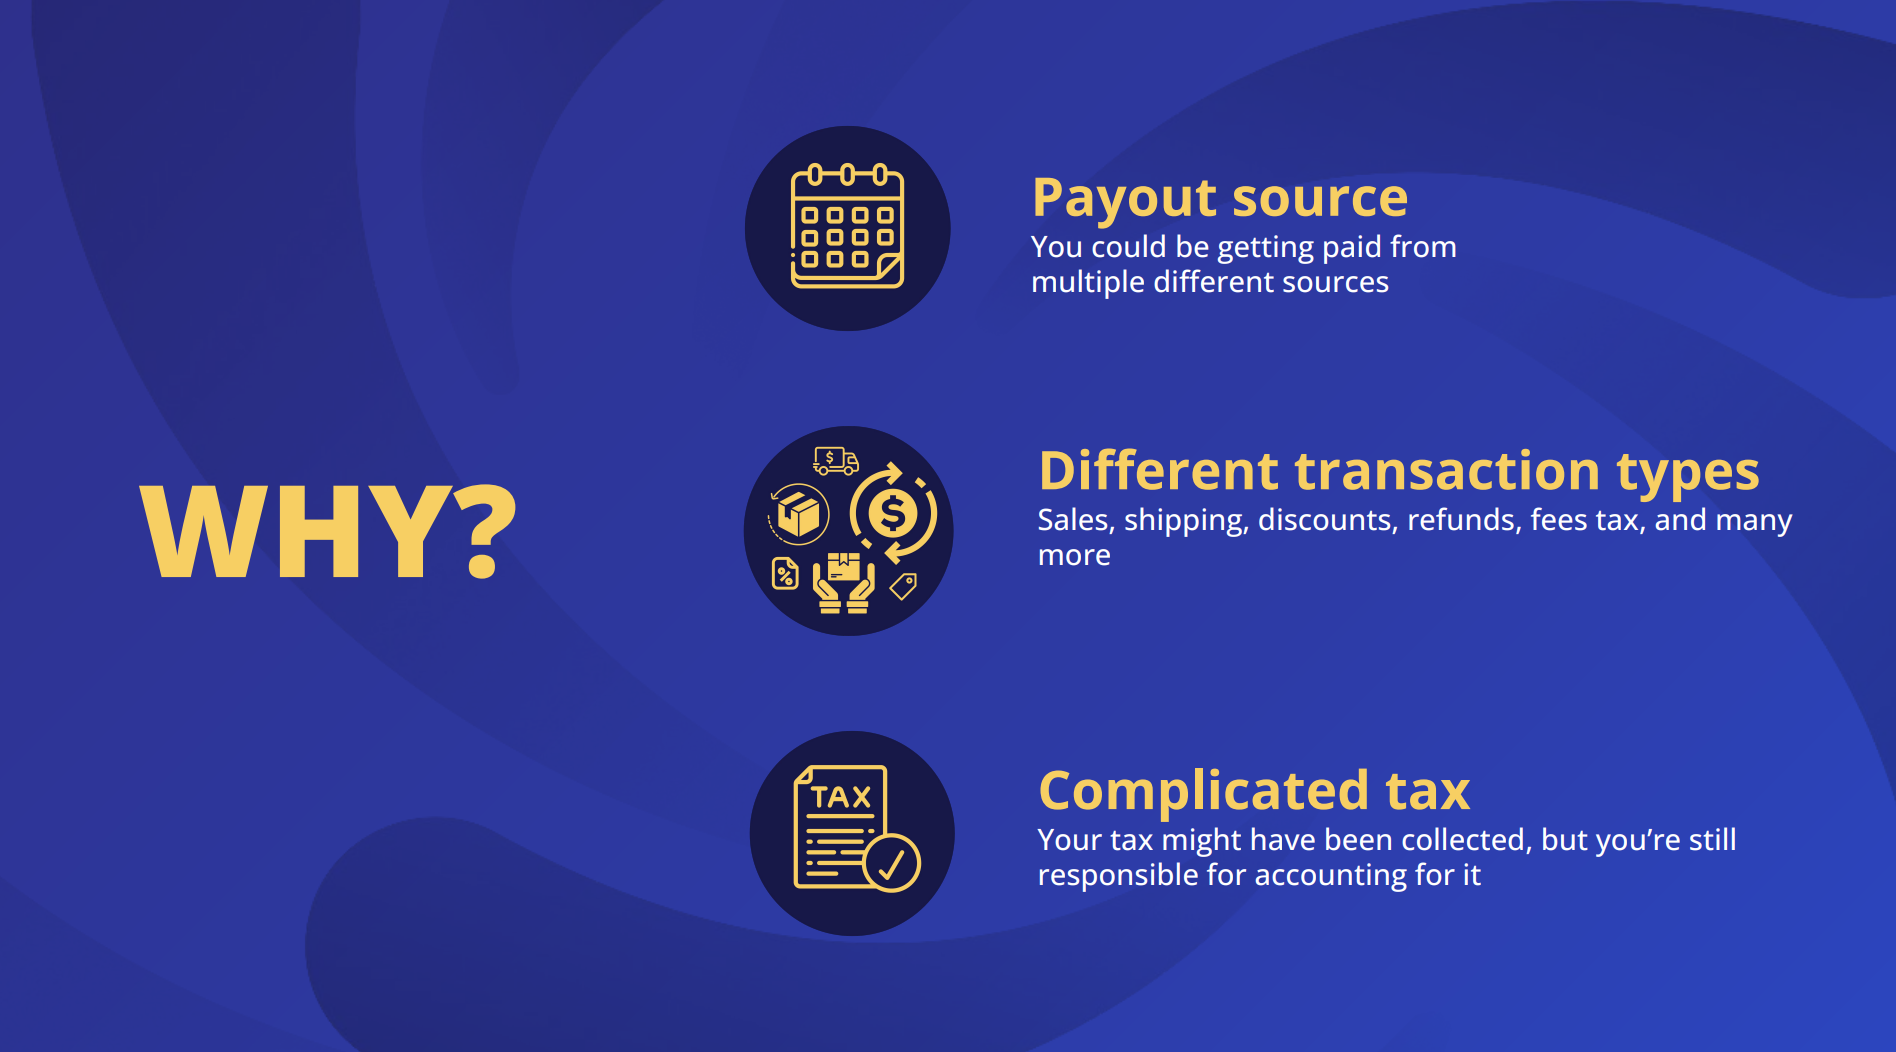 An images saying ecommerce is difficult because of the multiple payout sources, the various transaction types, and the complicated tax situation